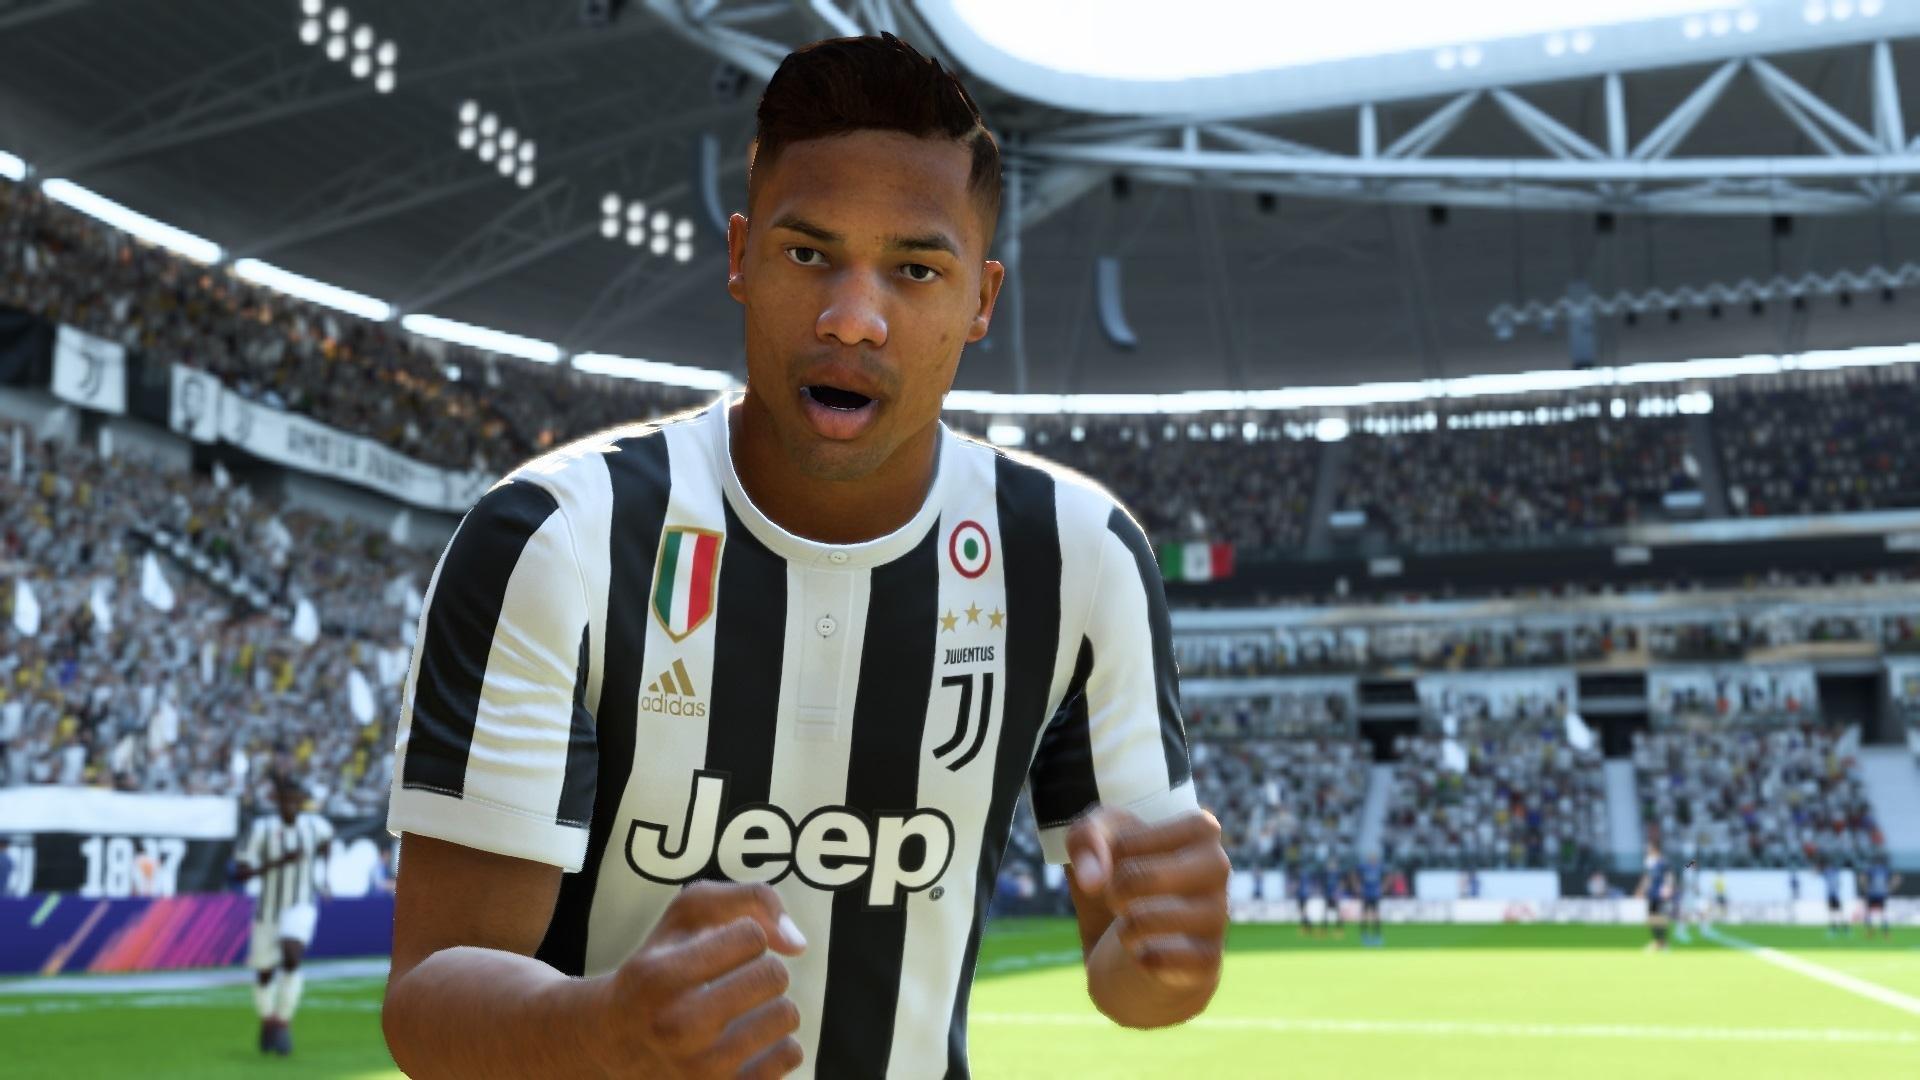 Alex Sandro now has one of the best cards in FIFA 20